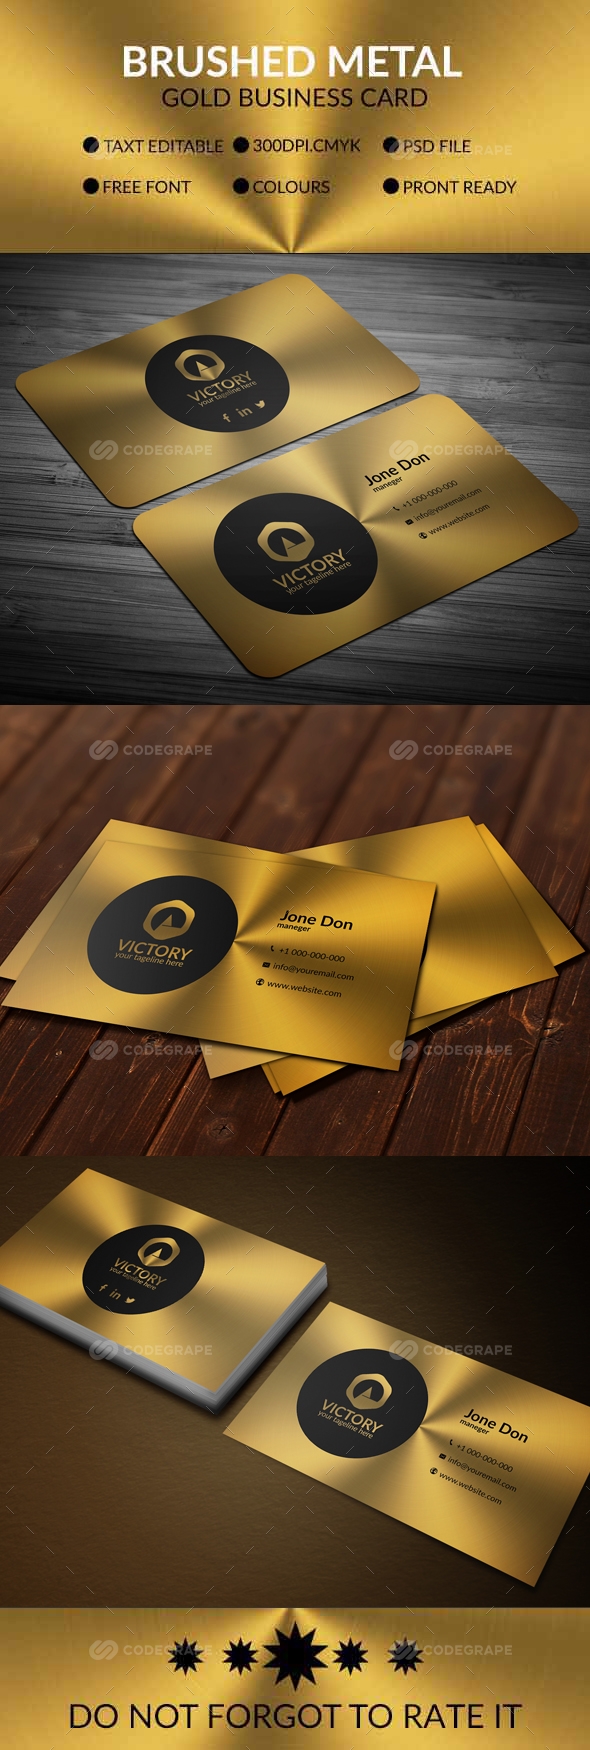 Brushed Metal Gold Business Card